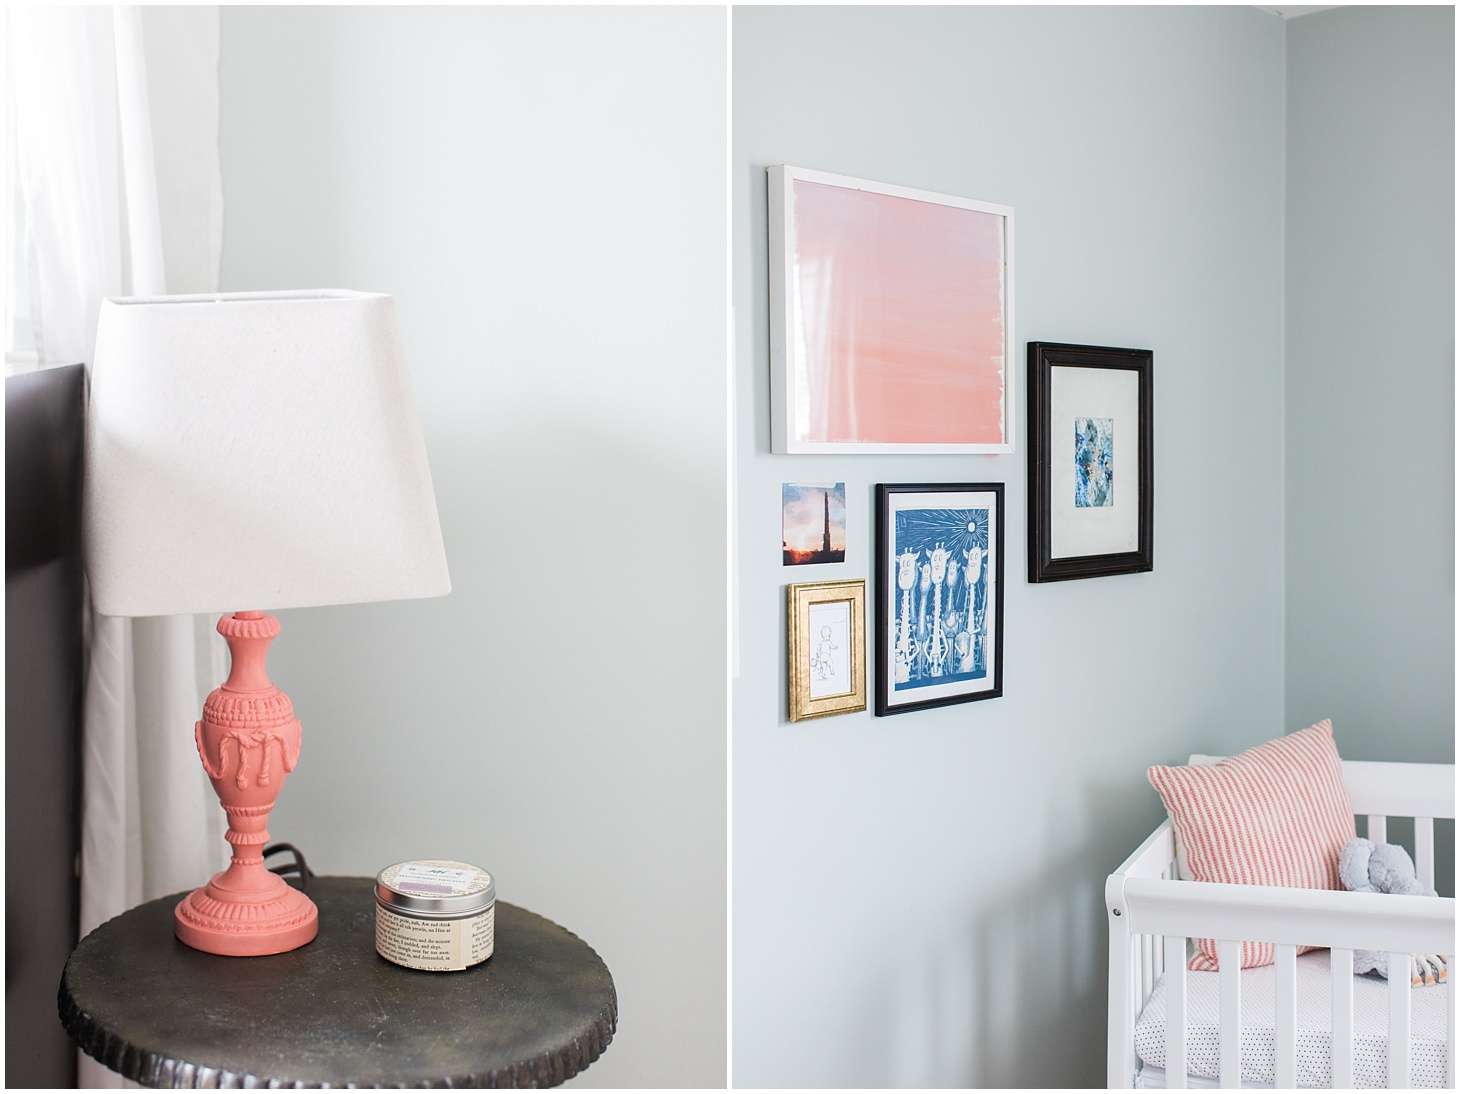 Home Tour: Grey, White, and Aqua with pops of Coral - Nursery for Baby Girl